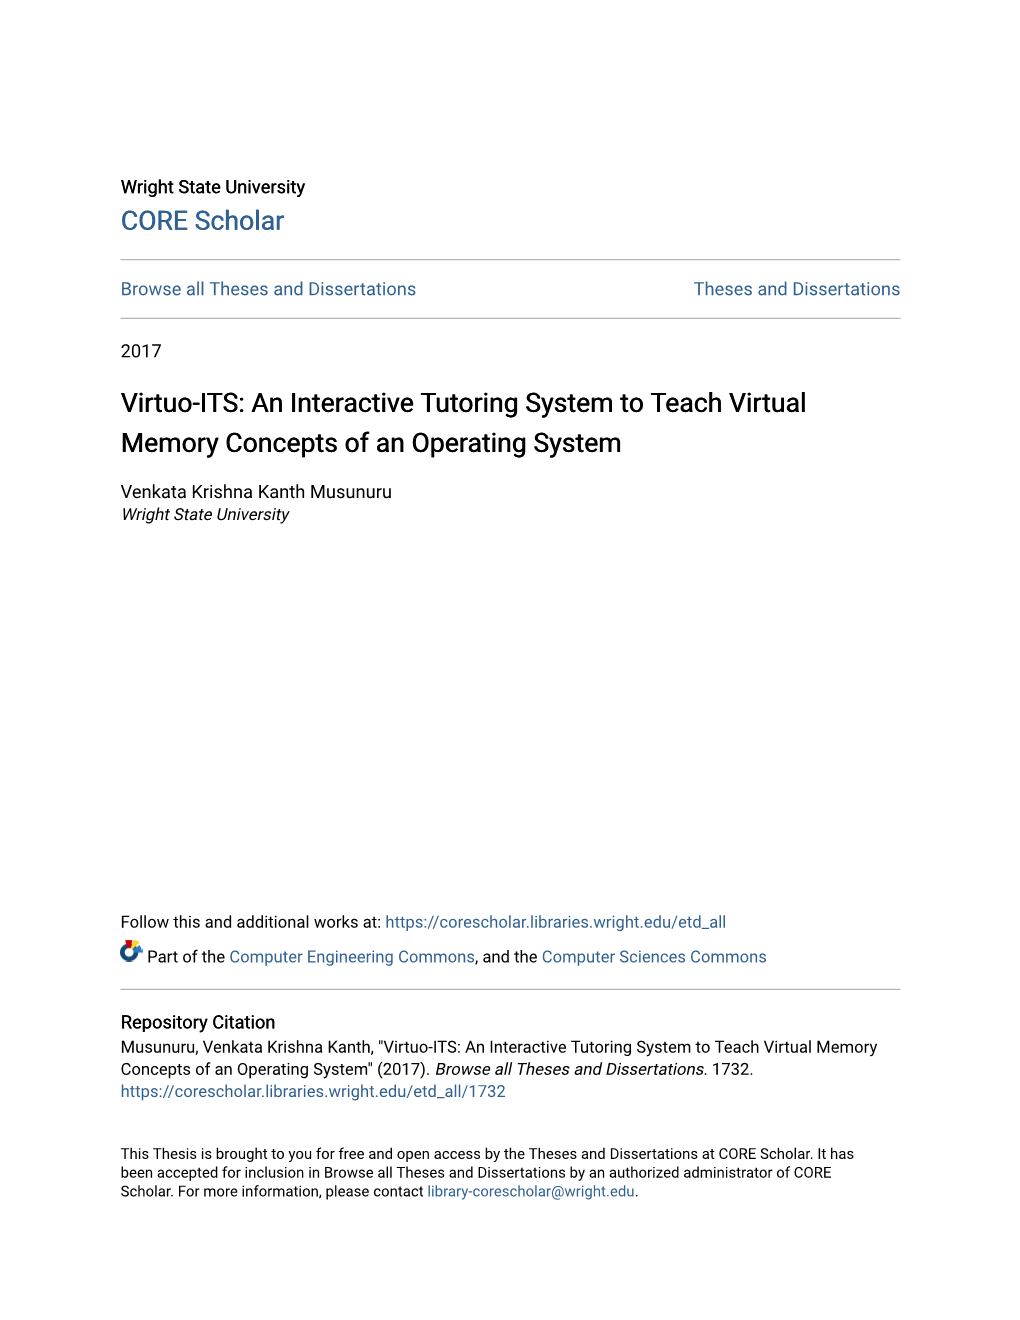 Virtuo-ITS: an Interactive Tutoring System to Teach Virtual Memory Concepts of an Operating System